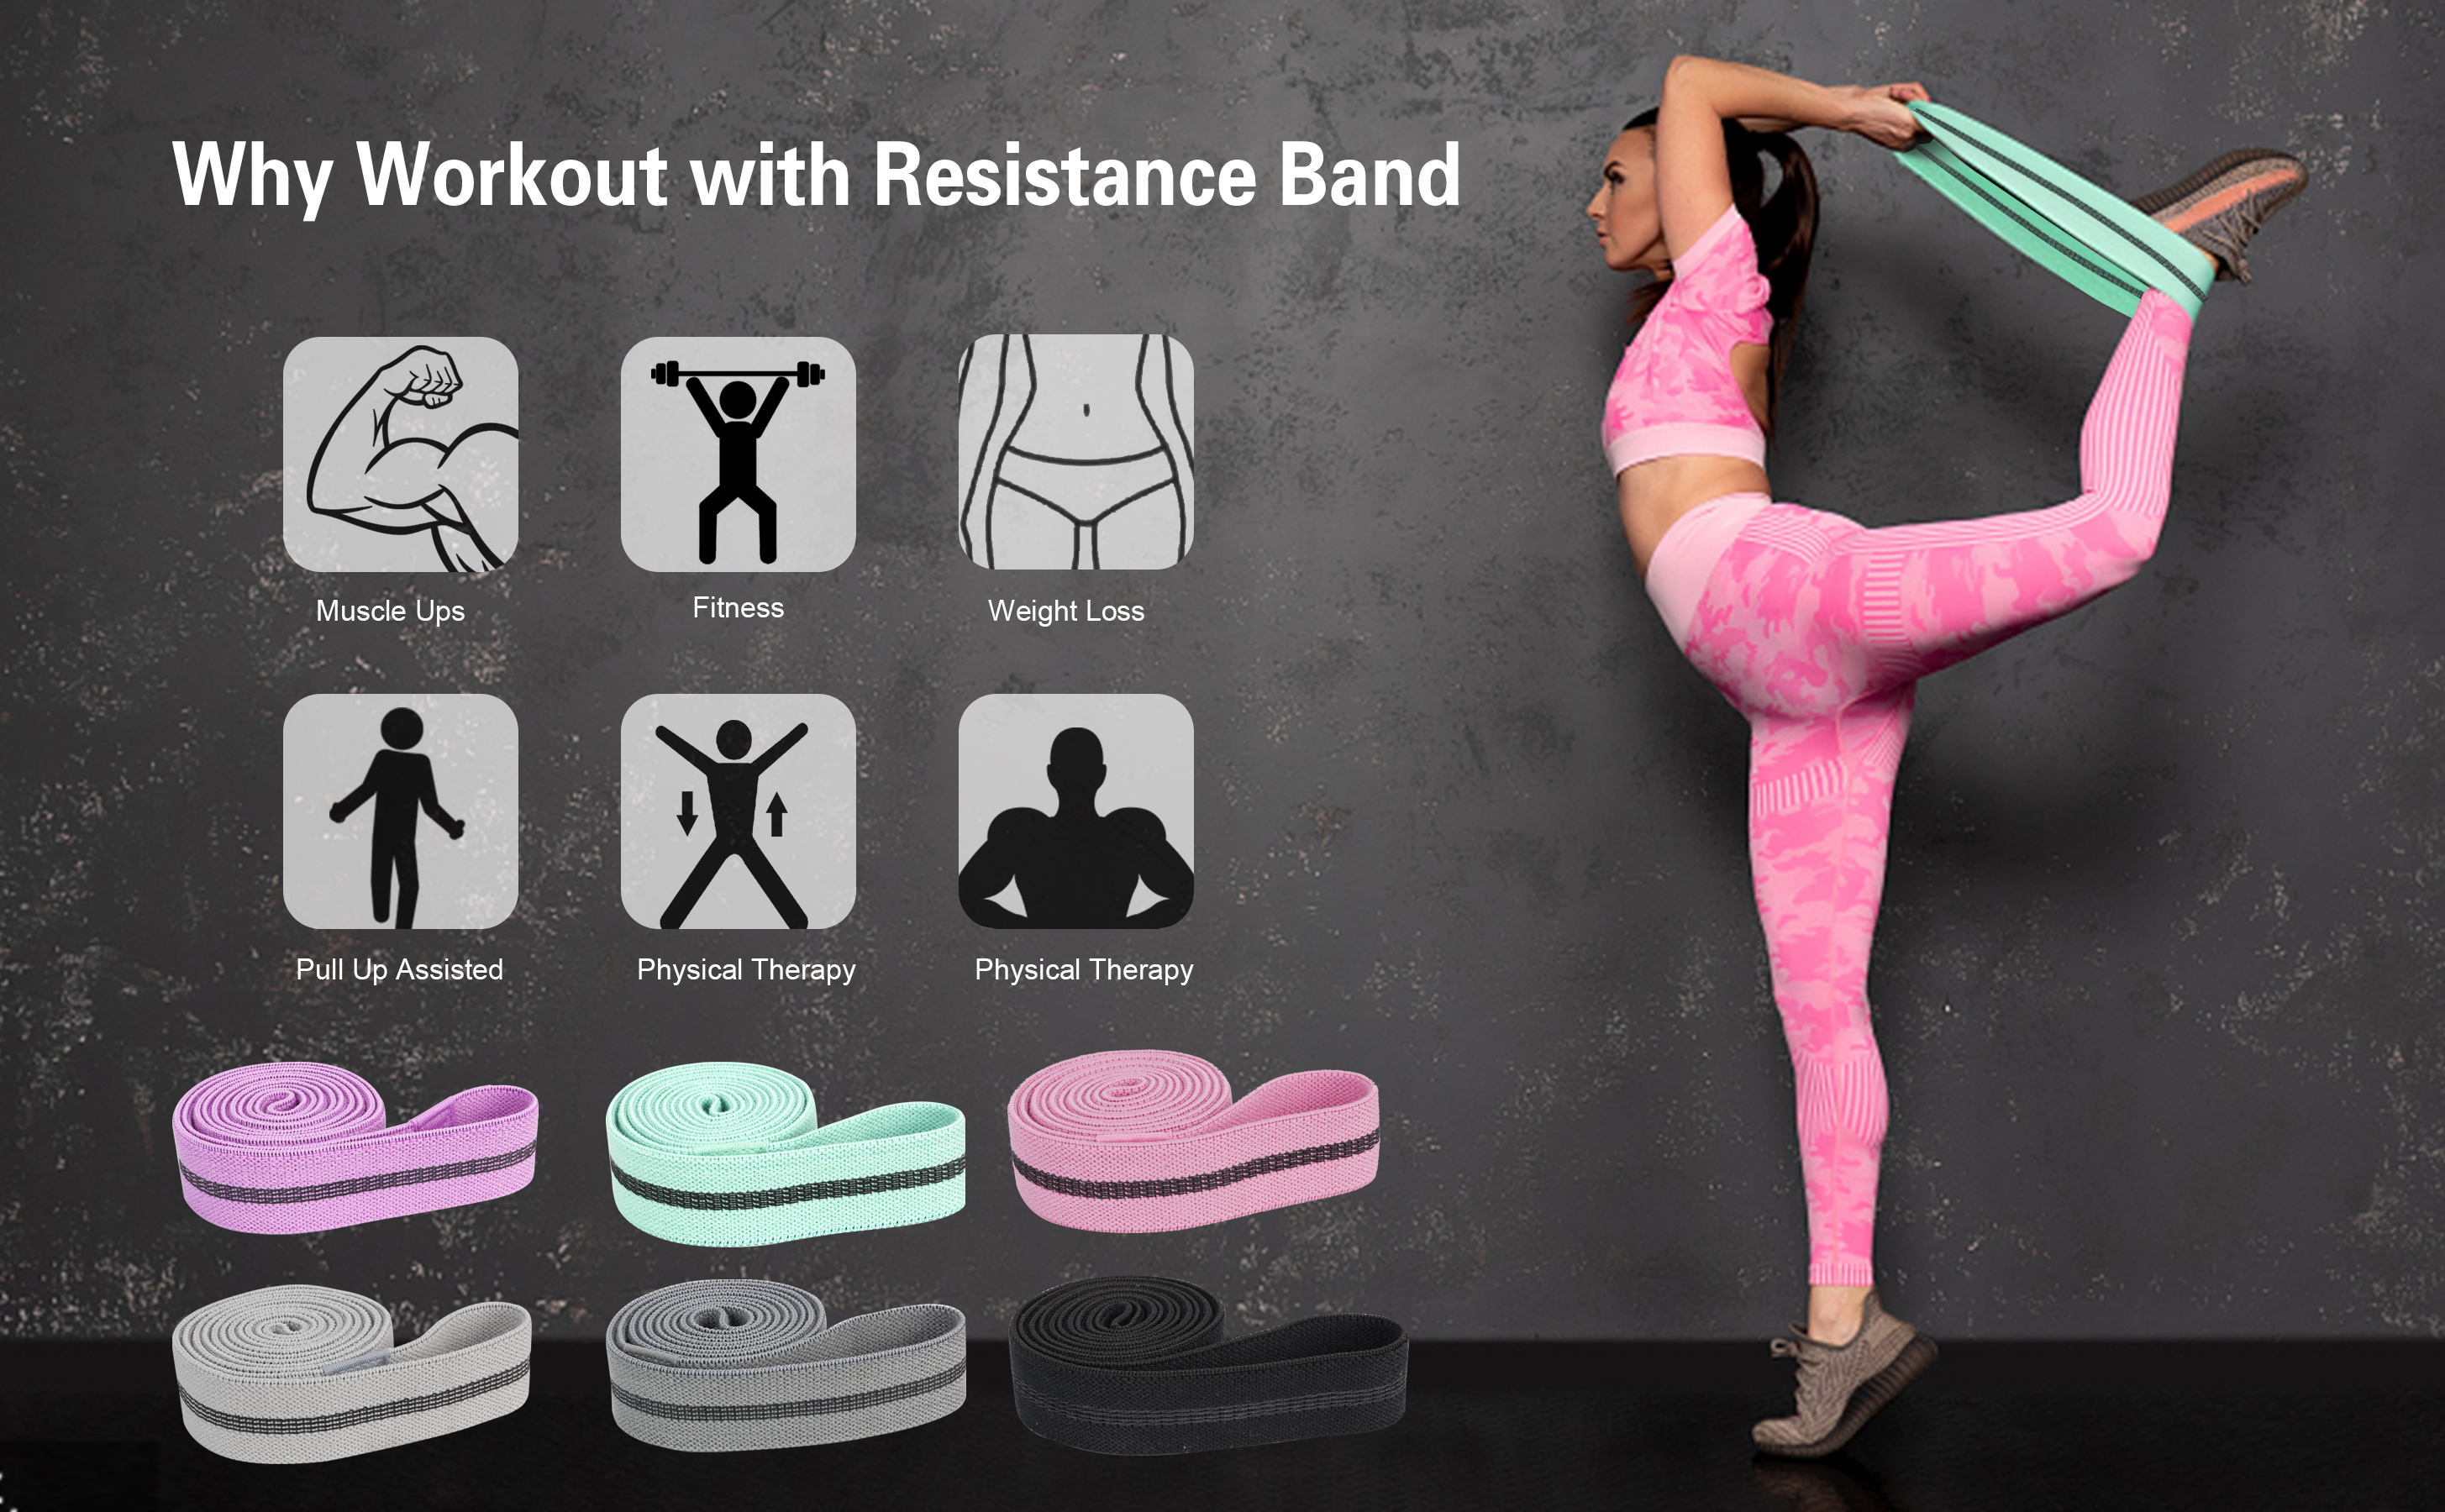 EOX Exercise Resistance Fabric Bands, Non-Slip Resistance Loop Workout  Bands for Strength Training, Physical Therapy,Legs and Glutes, 5 Resistance